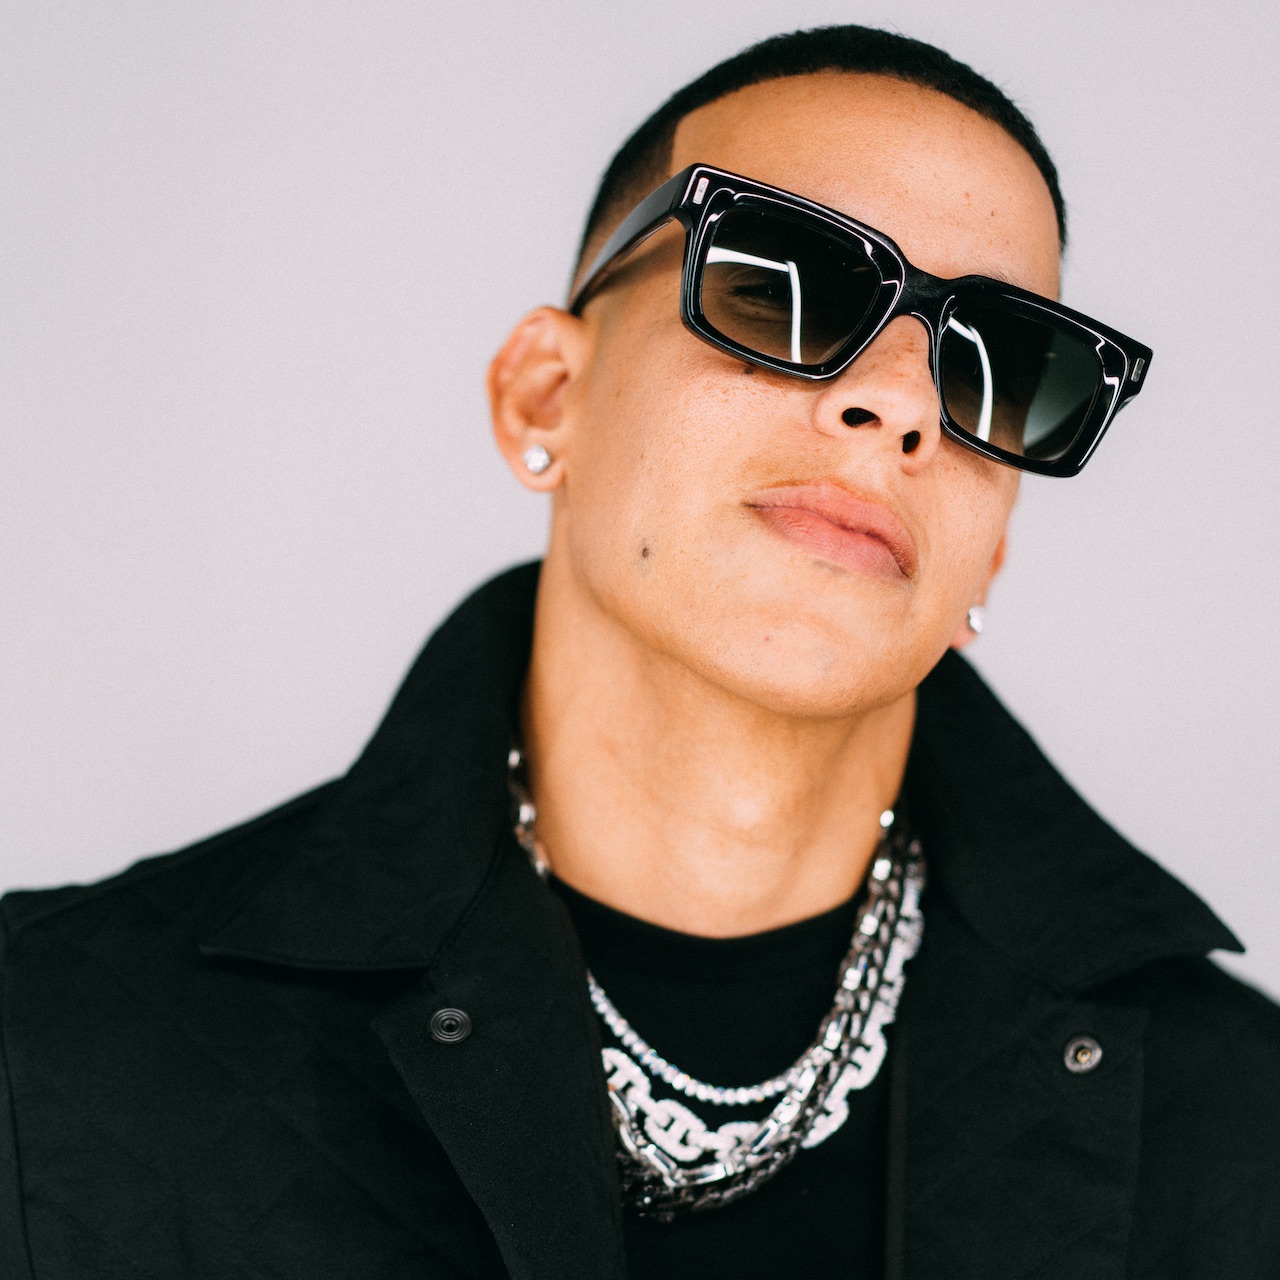 Daddy Yankee Brings the Heart of Puerto Rico to Fans Worldwide